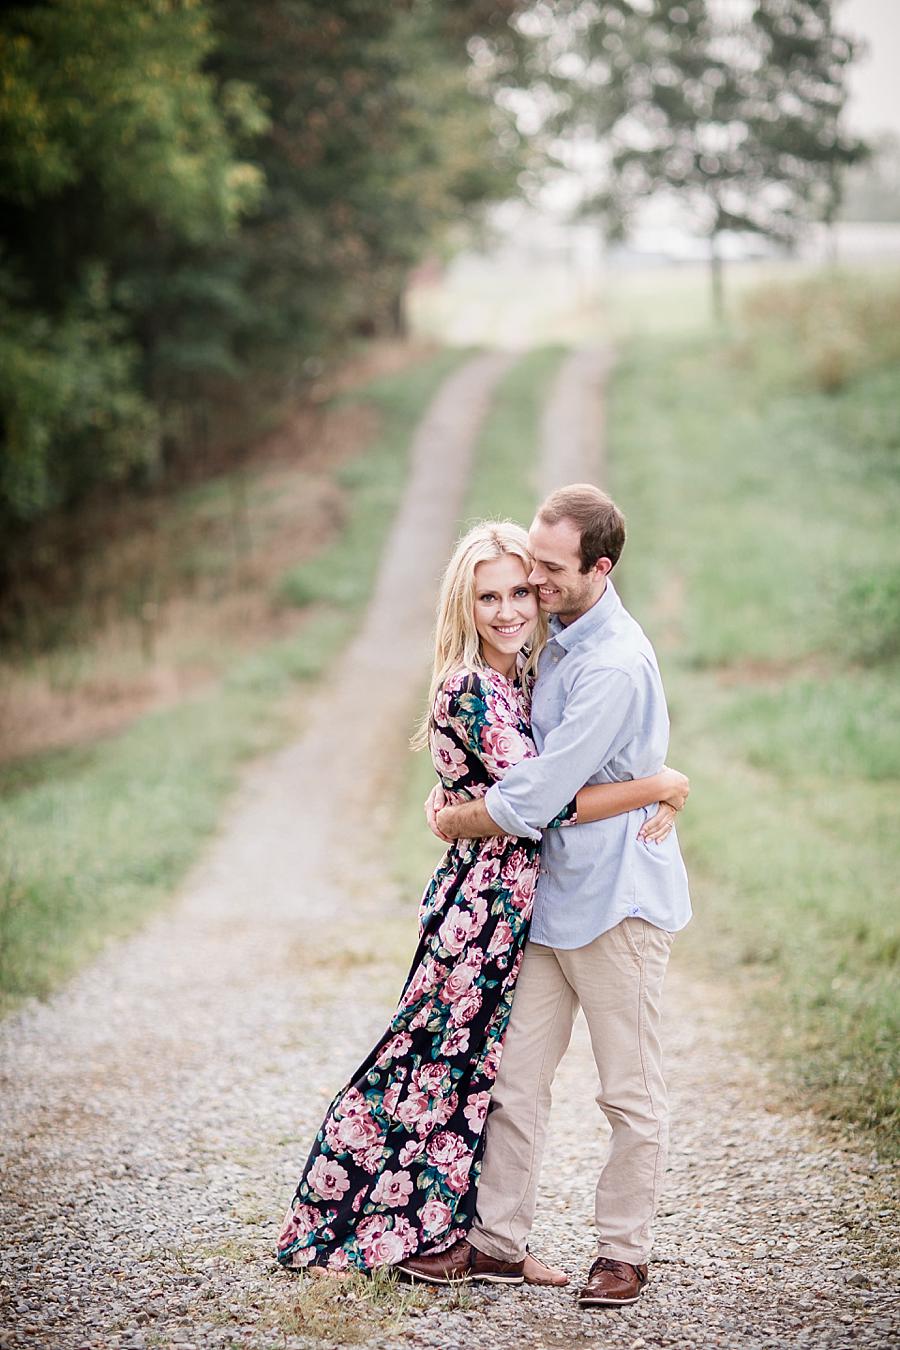 Arms wrapped around waist at this Family Farm Engagement Session by Knoxville Wedding Photographer, Amanda May Photos.